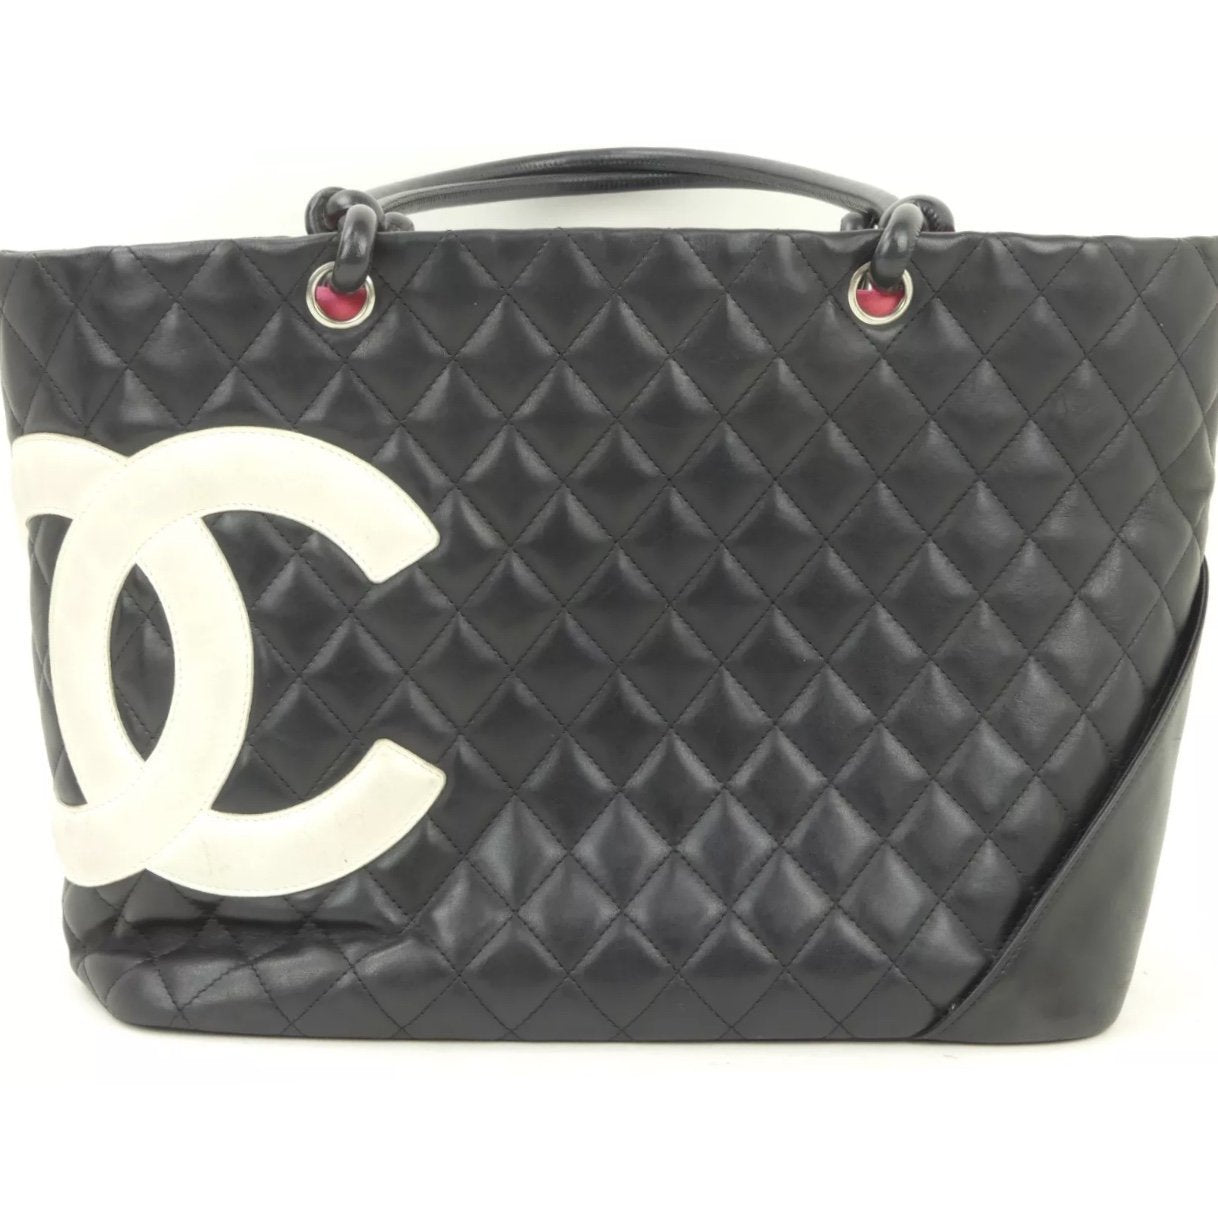 CHANEL Black Quilted Leather Large Cambon Tote Bag